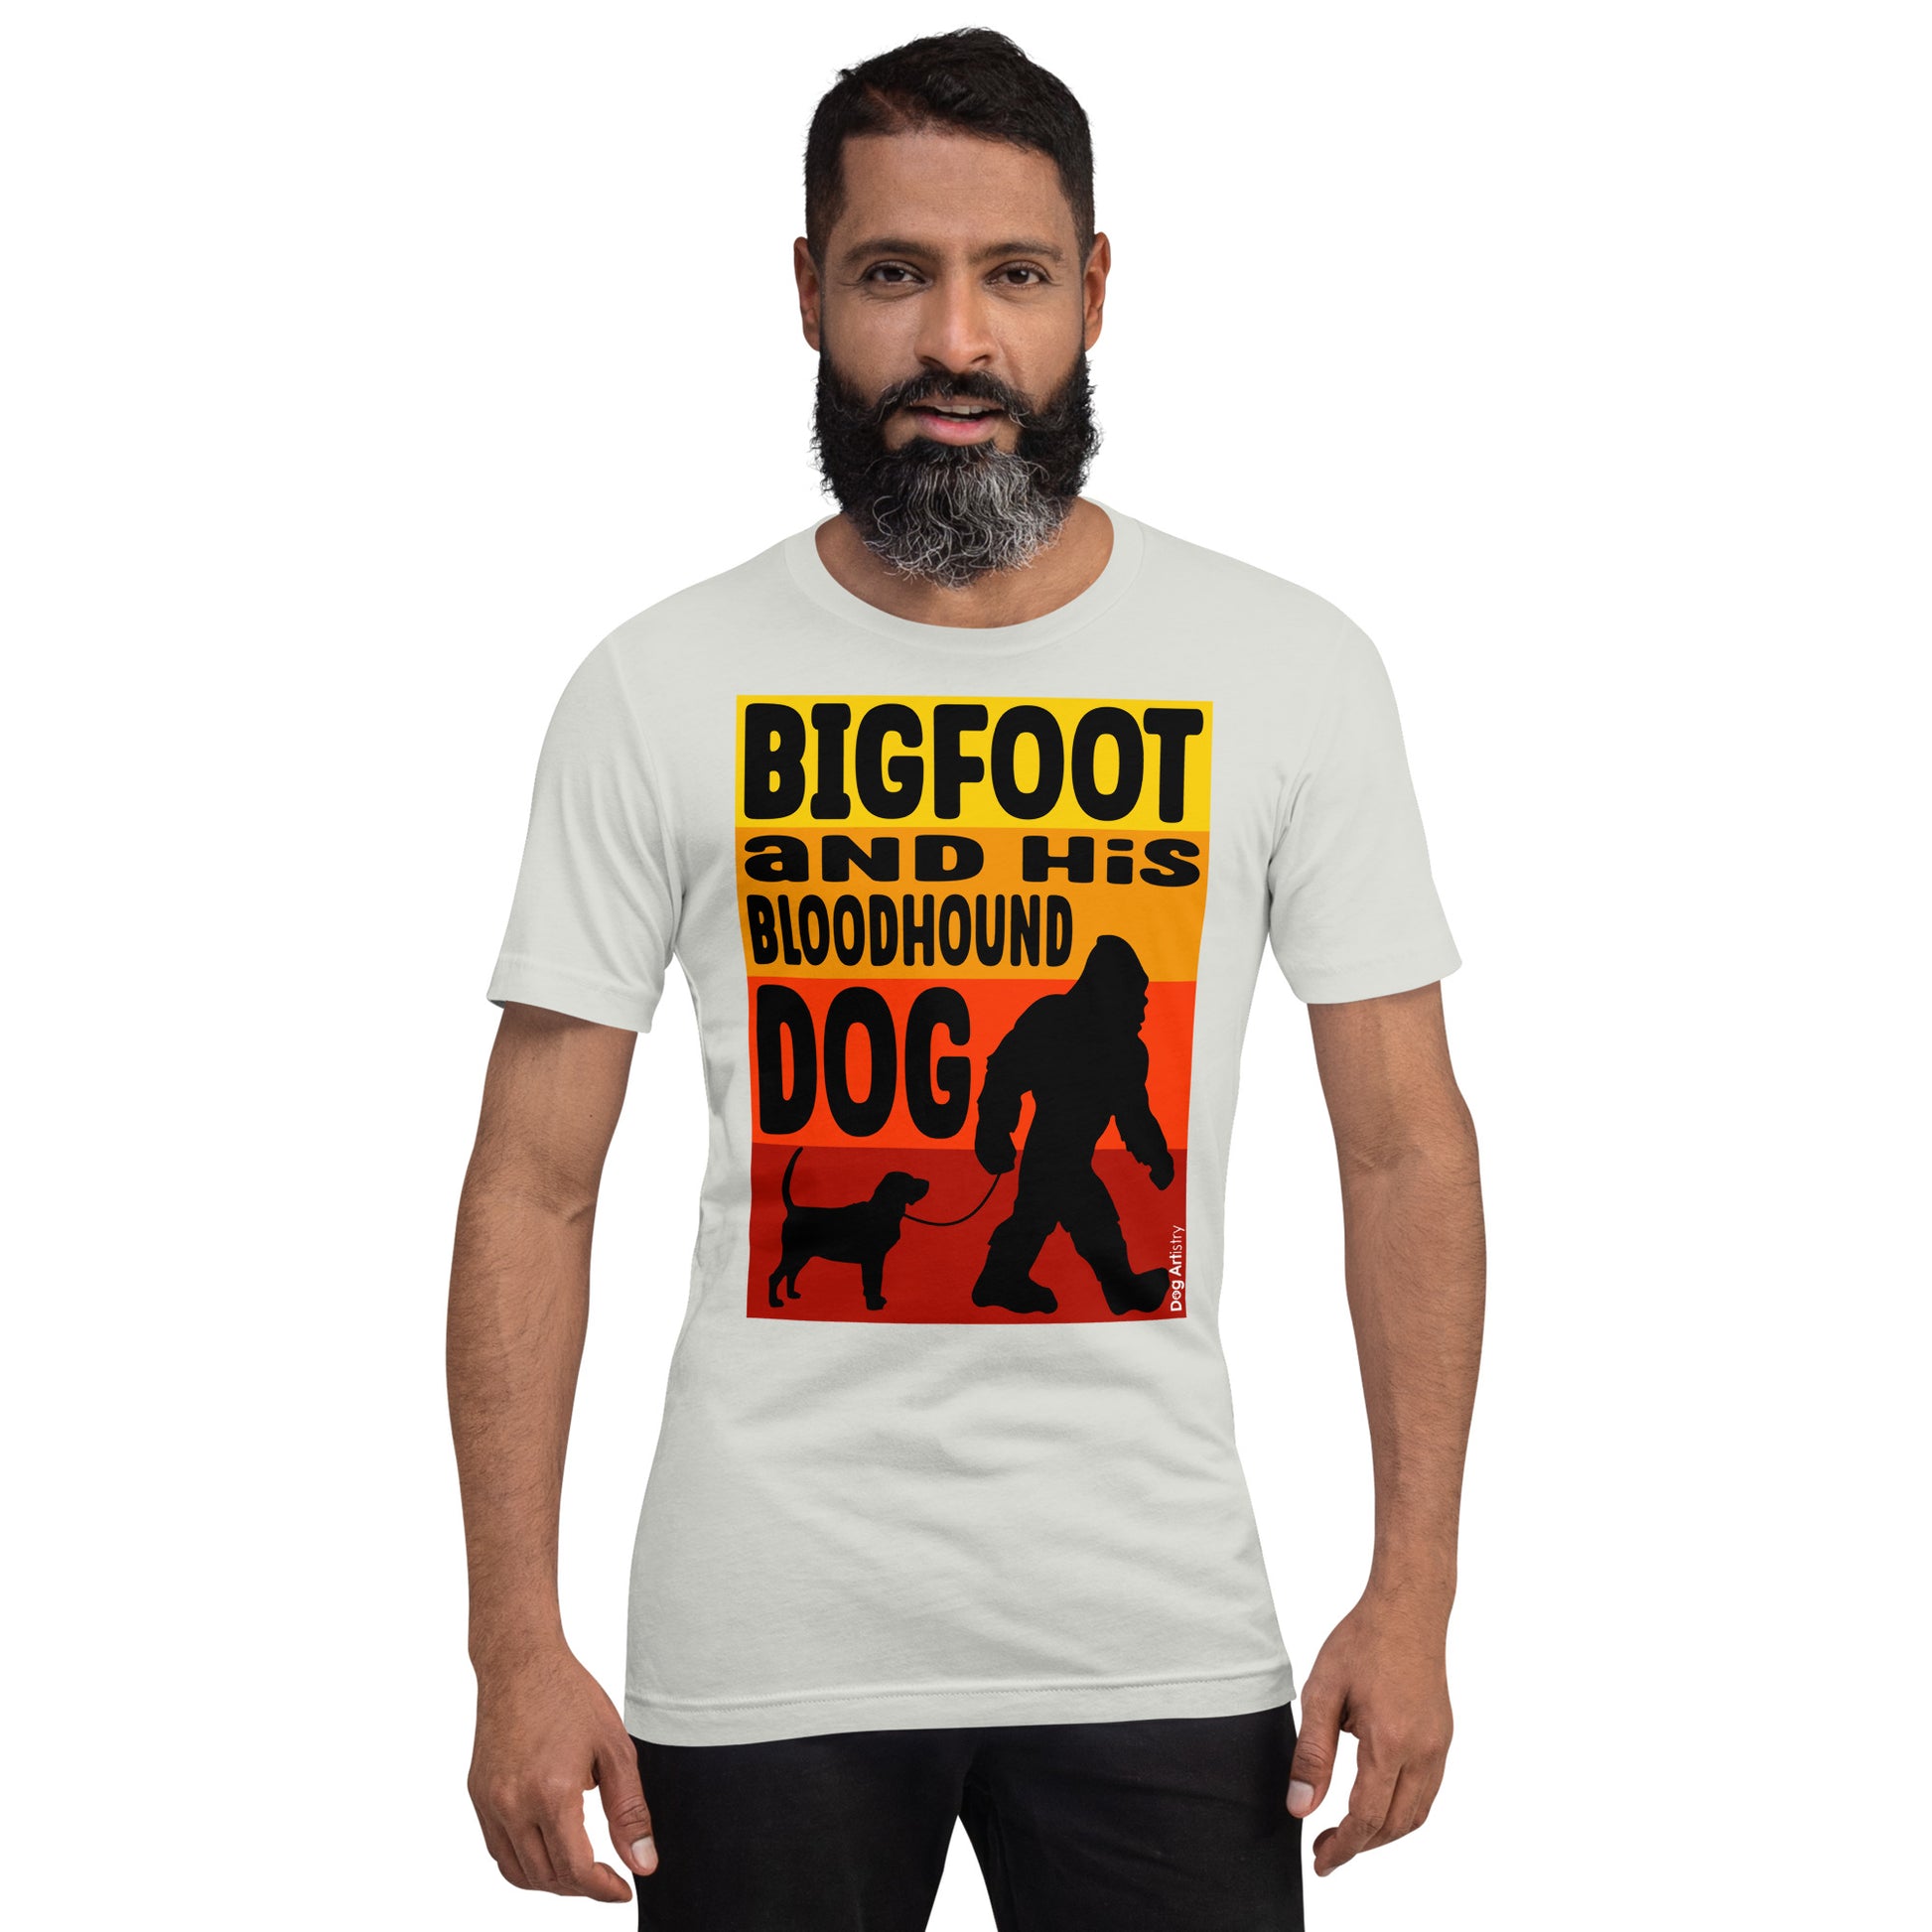 Big foot and his Bloodhound unisex silver t-shirt by Dog Artistry.